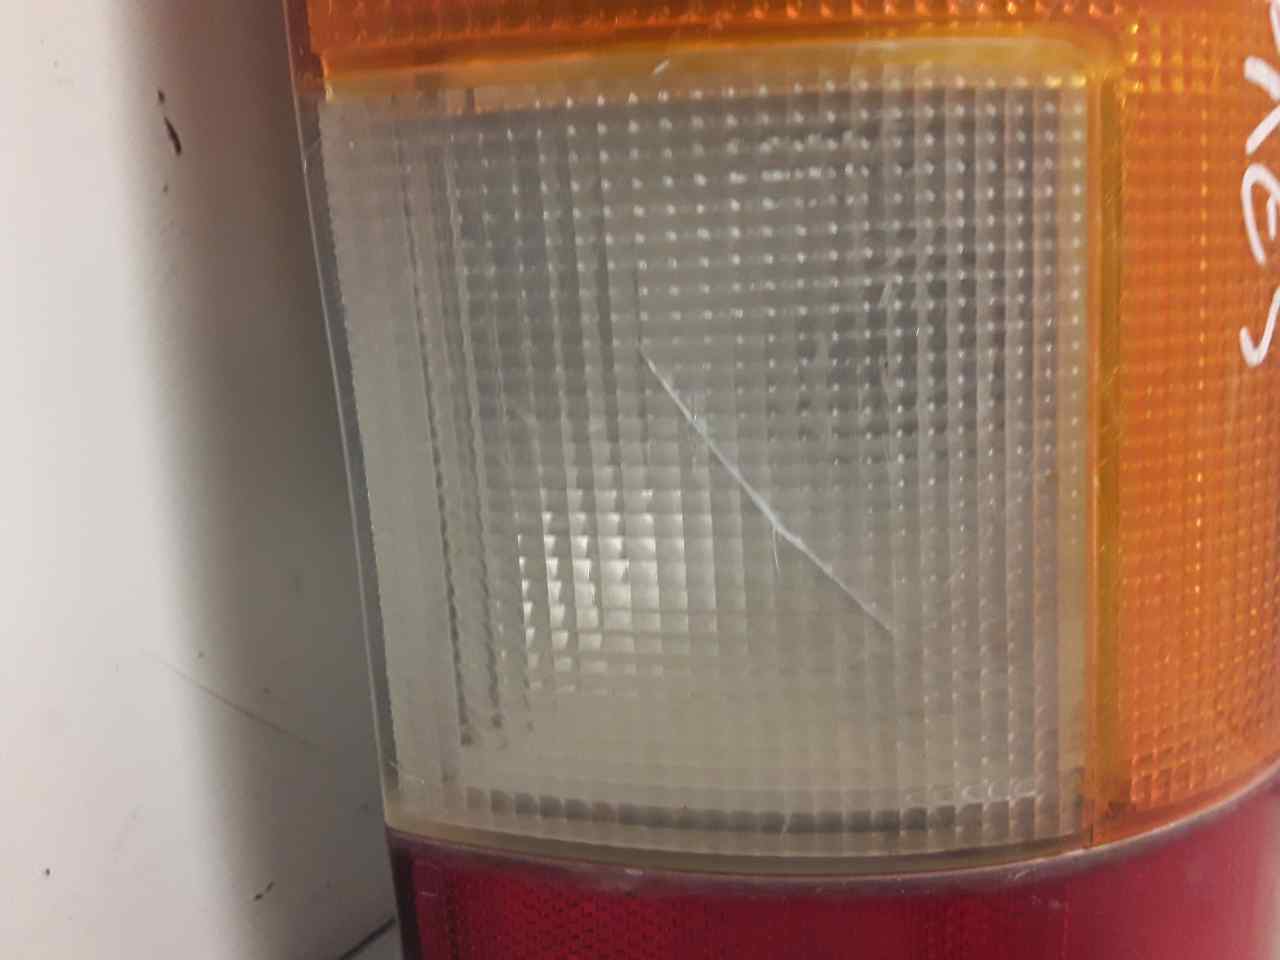 RENAULT Express Rear Right Taillight Lamp 7700811992 25089222